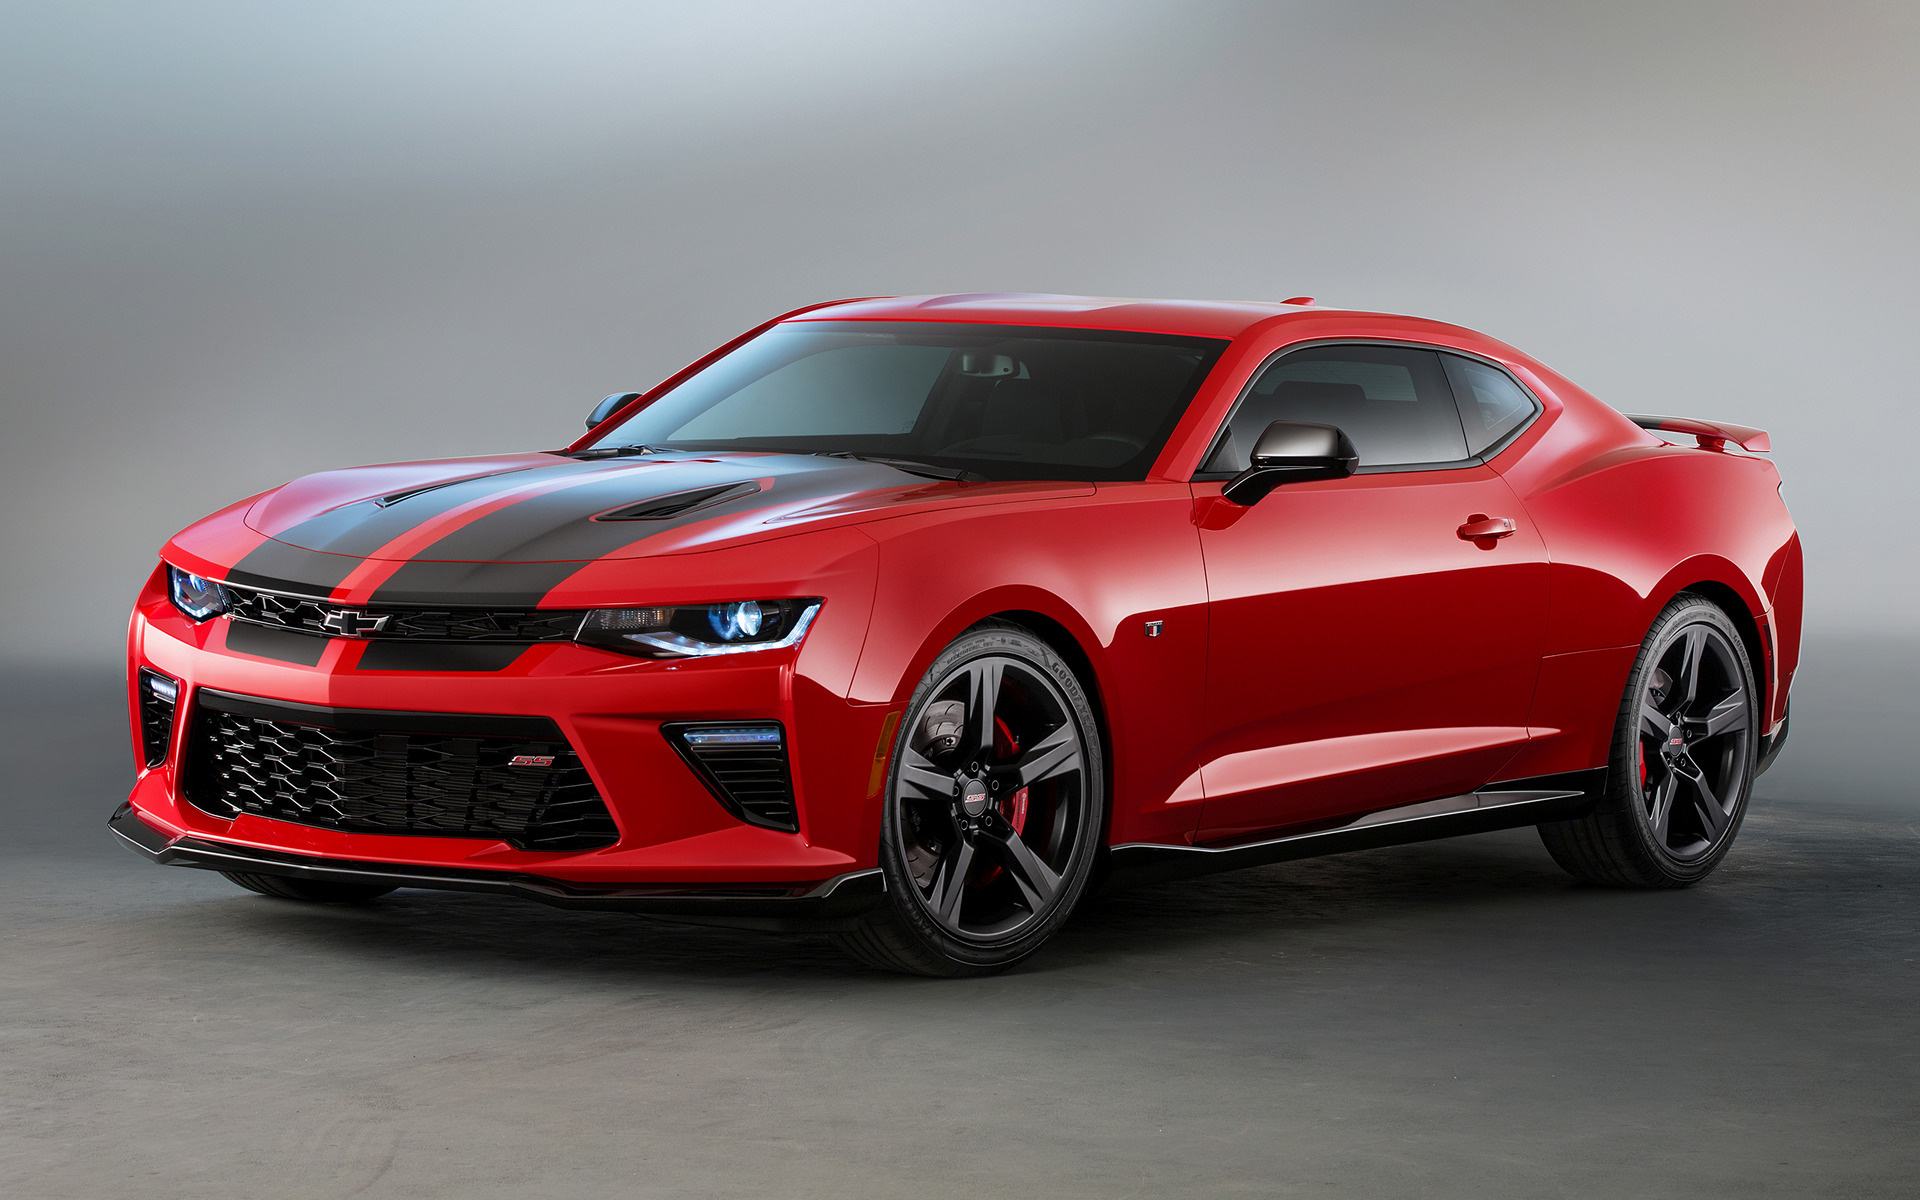 2015 Chevrolet Camaro SS Black Accent Concept - Wallpapers and HD